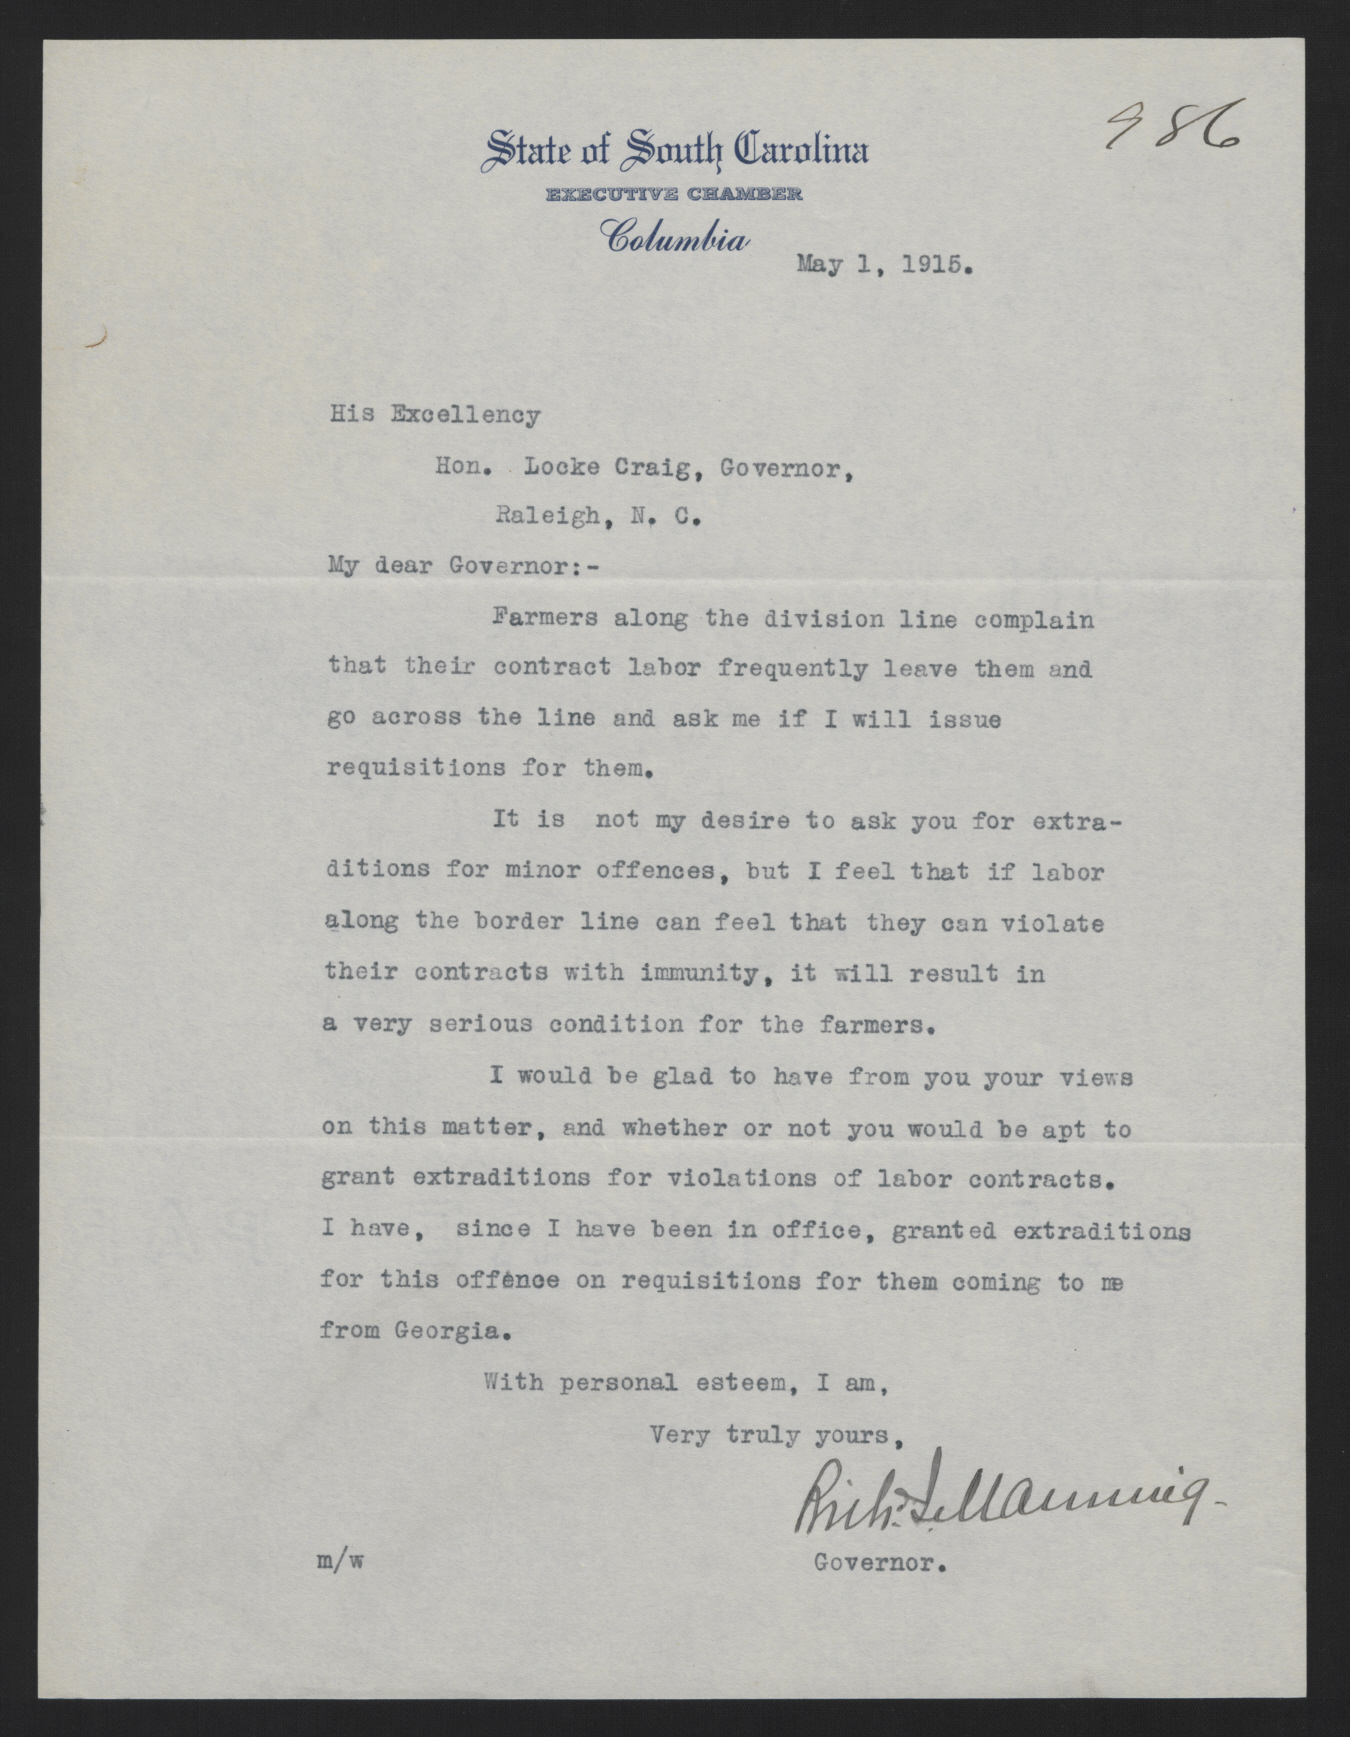 Letter from Manning to Craig, May 1, 1915